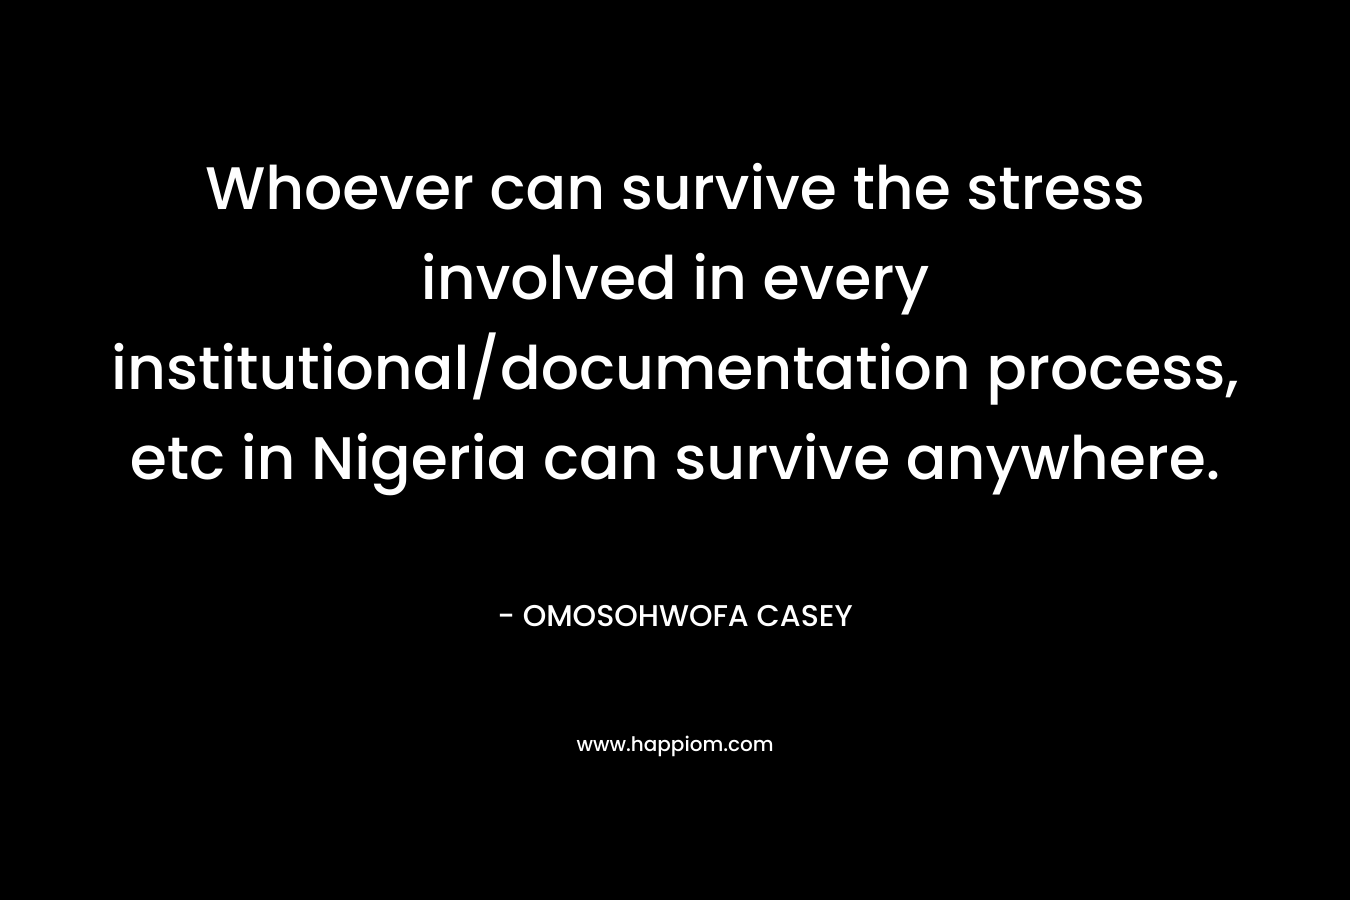 Whoever can survive the stress involved in every institutional/documentation process, etc in Nigeria can survive anywhere. – OMOSOHWOFA CASEY